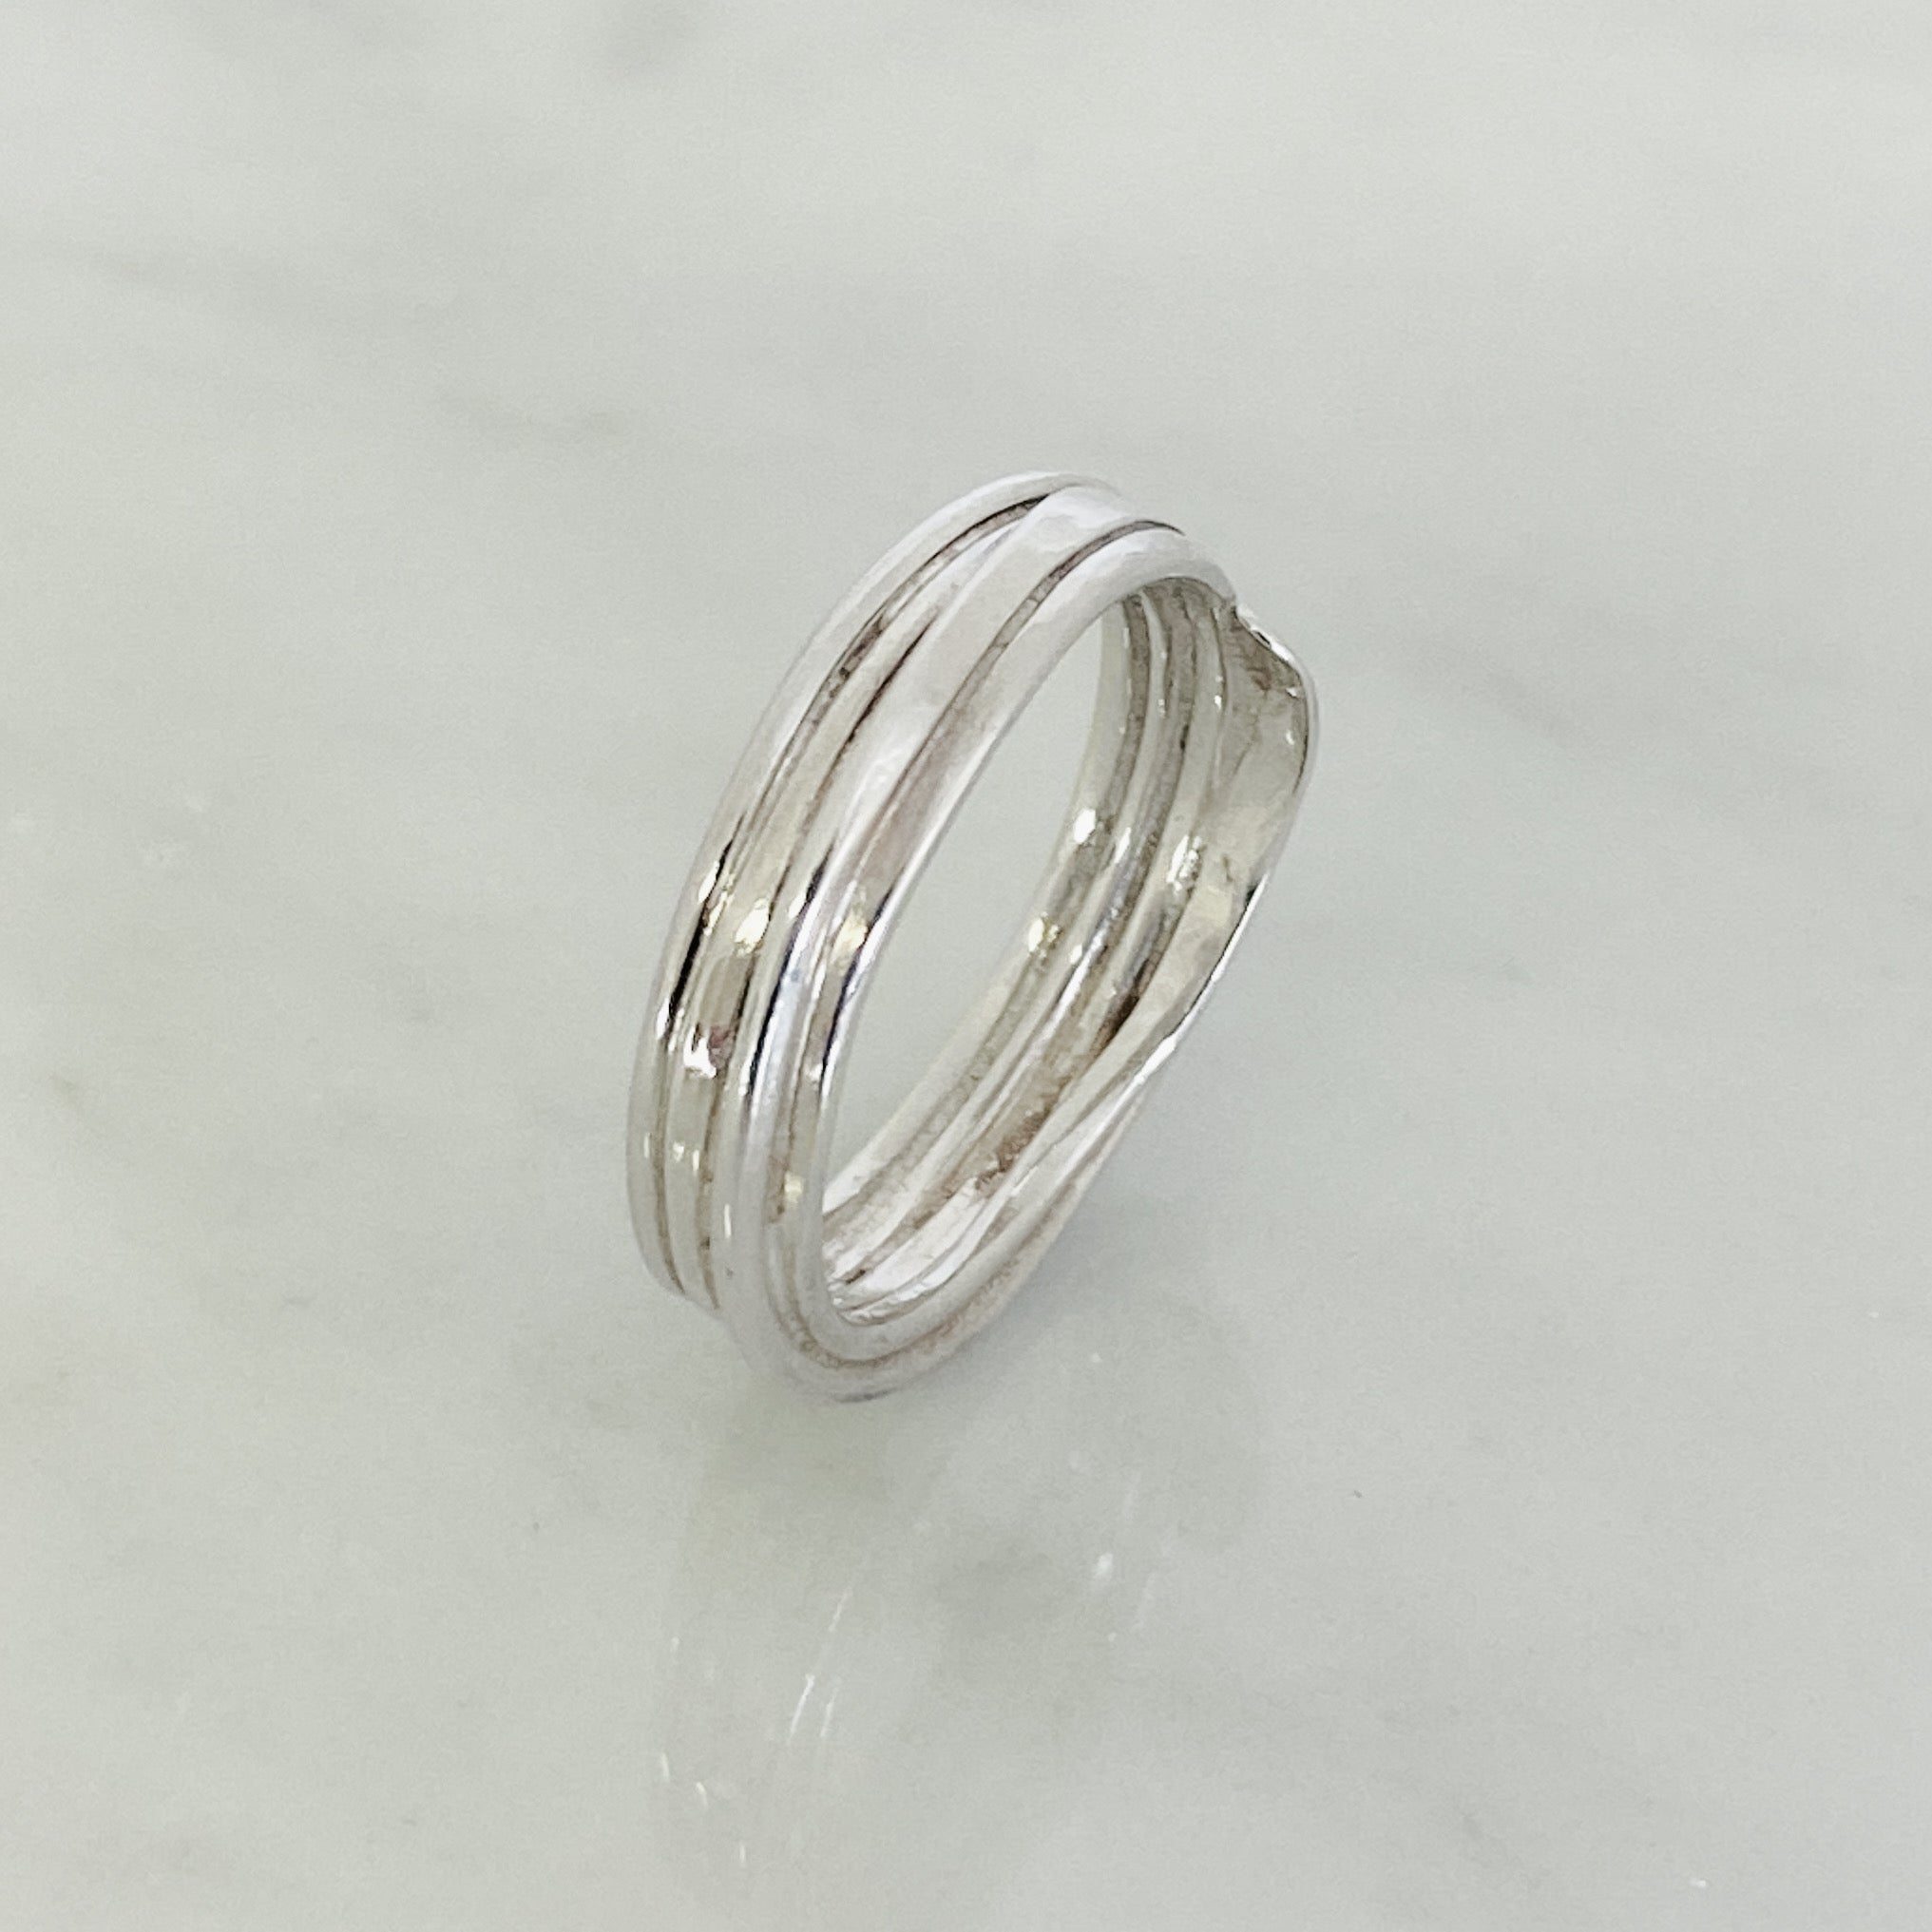 Silver Wrapped Wedding Ring